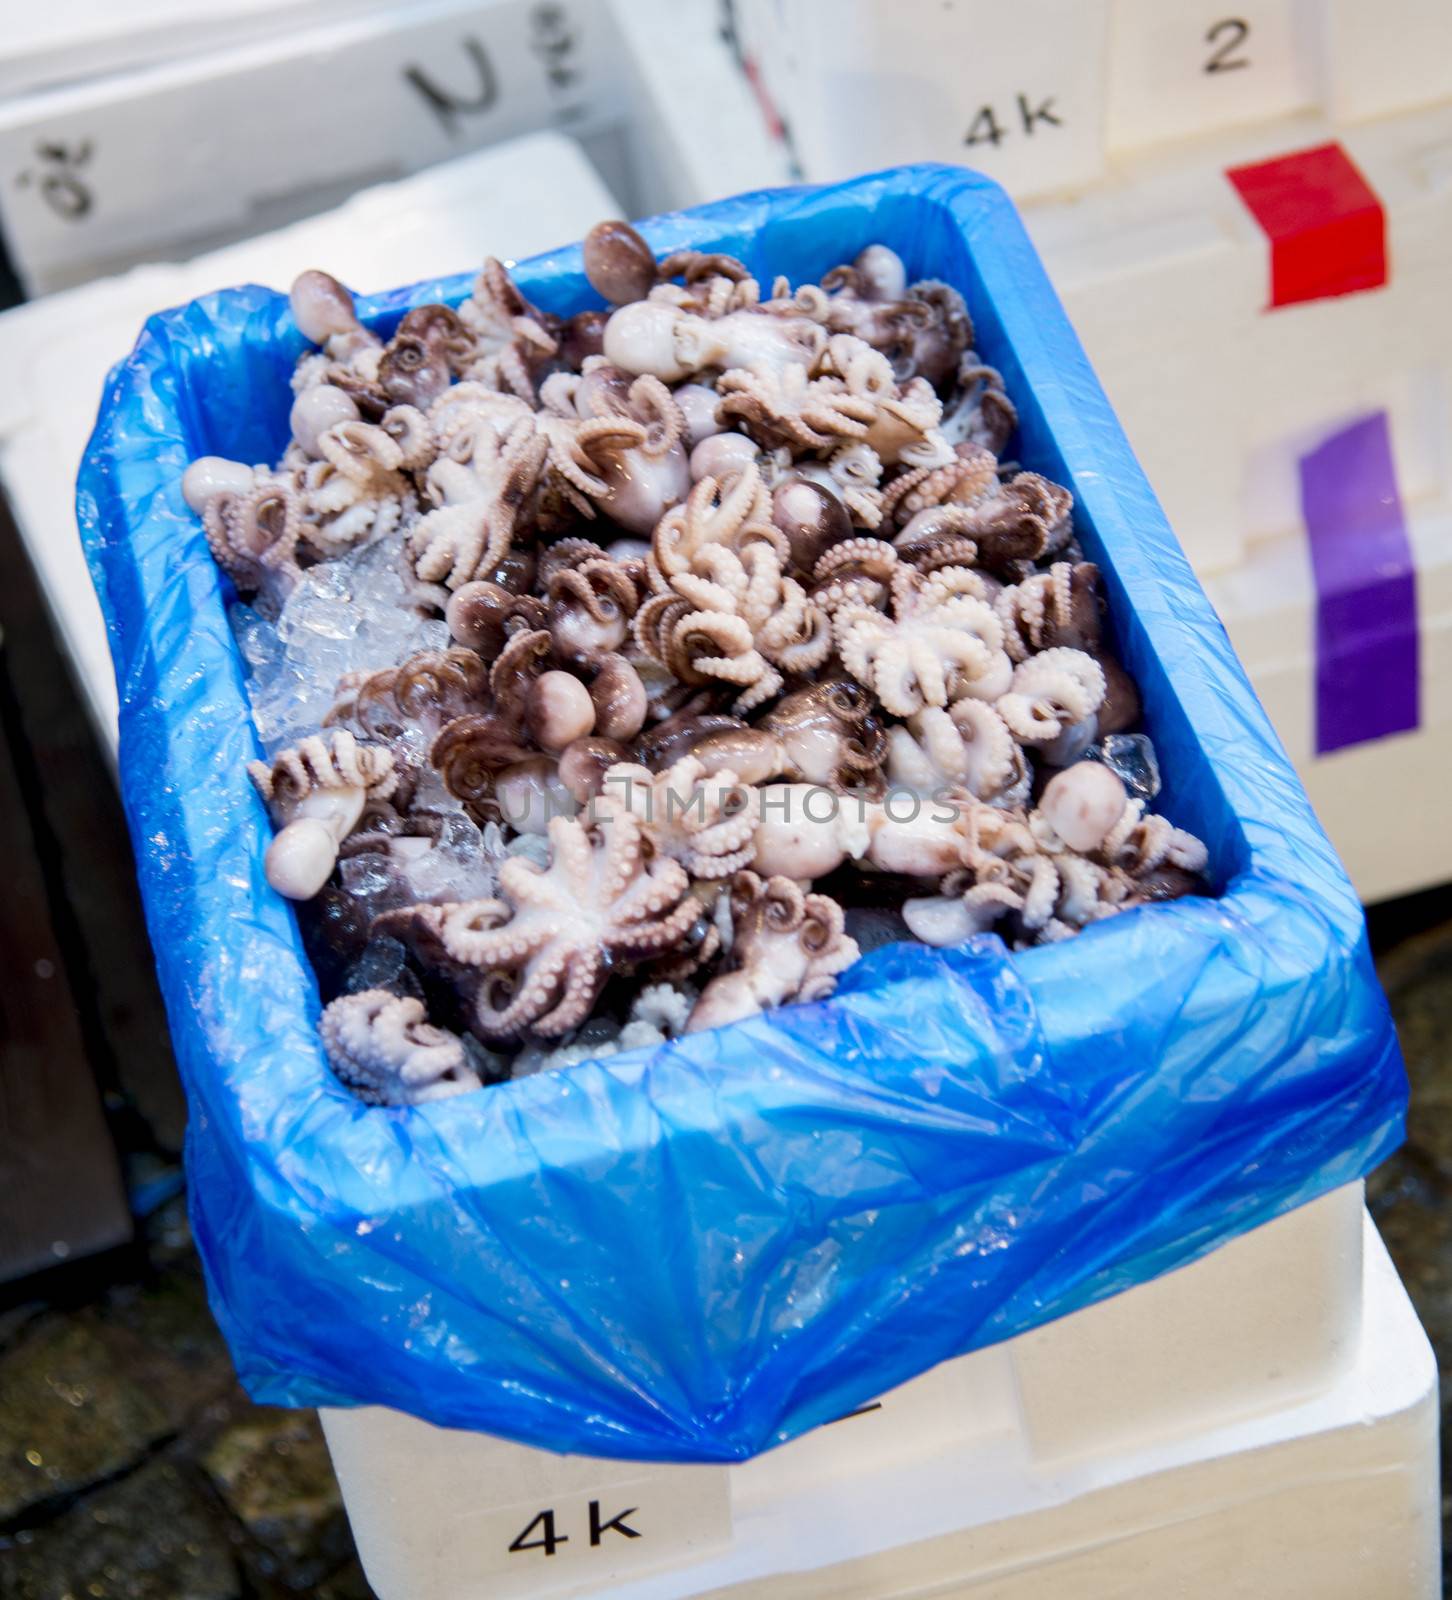 A lot of small squids on ice for sale